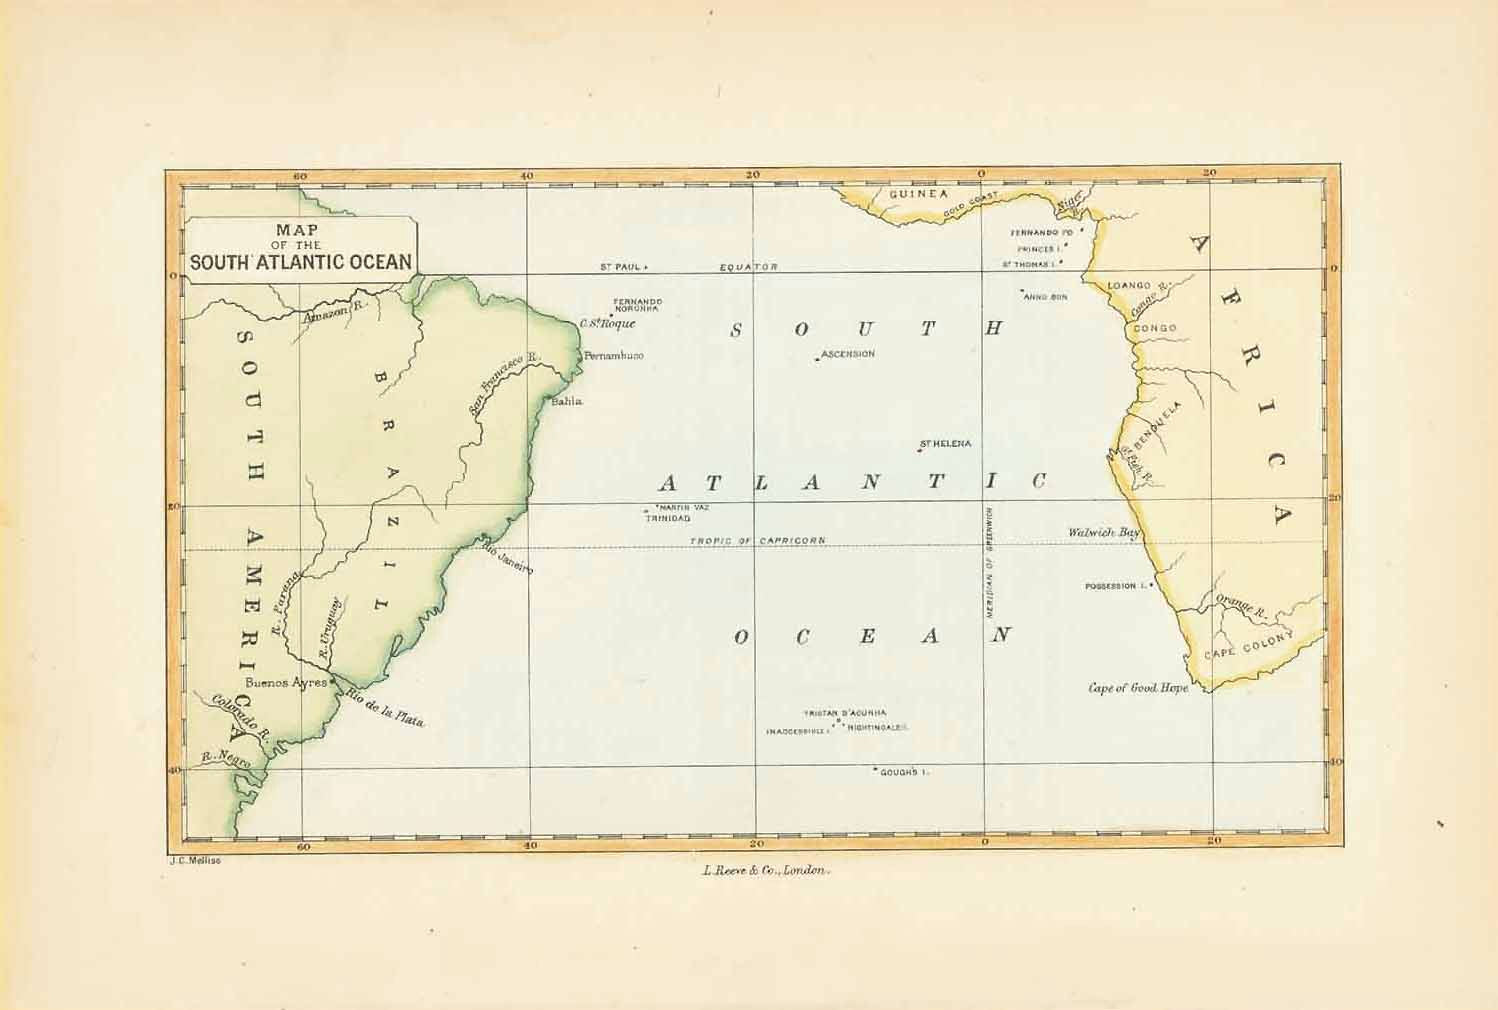 "Map of the South Atlantic Ocean"  Hand-colored wood engraving by John Charles Melliss  London, 1875  Original antique print   For a 30% discount enter MAPS30 at chekout  On the South American continent we see Brazil and some of the coast line of Argentina. Africa's West Coast is shown from the Gulf of Guinea to the Cape. Lonely in the middle of the ocean: The island of St. Helena. What a distant place to park Mr. Napoleon!